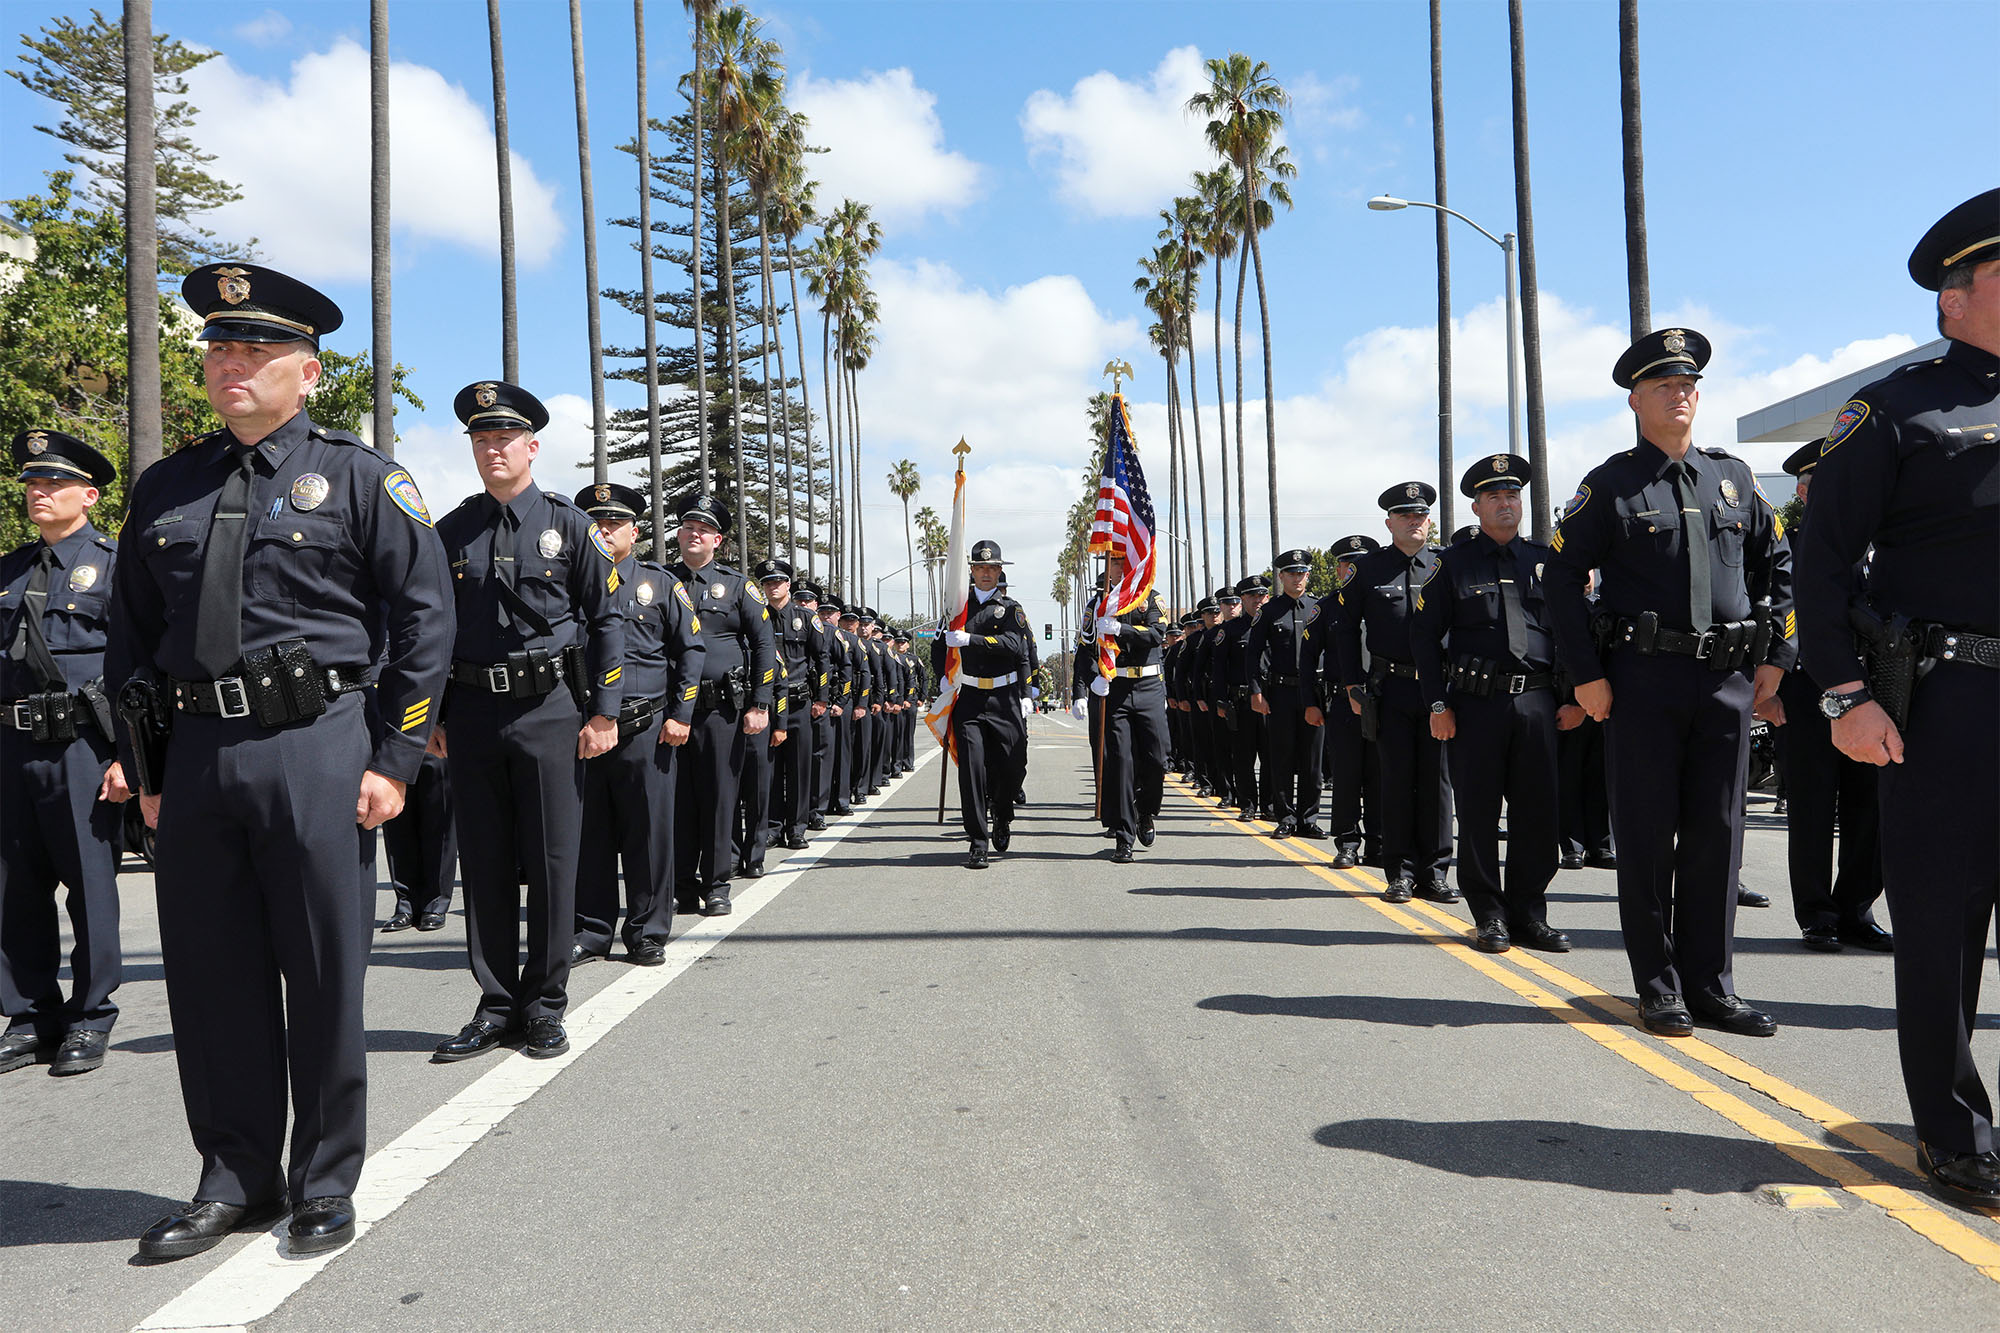 http://Police%20officers%20standing%20at%20formation%20during%20the%20Oxnard%20PD%20Memorial%20event.